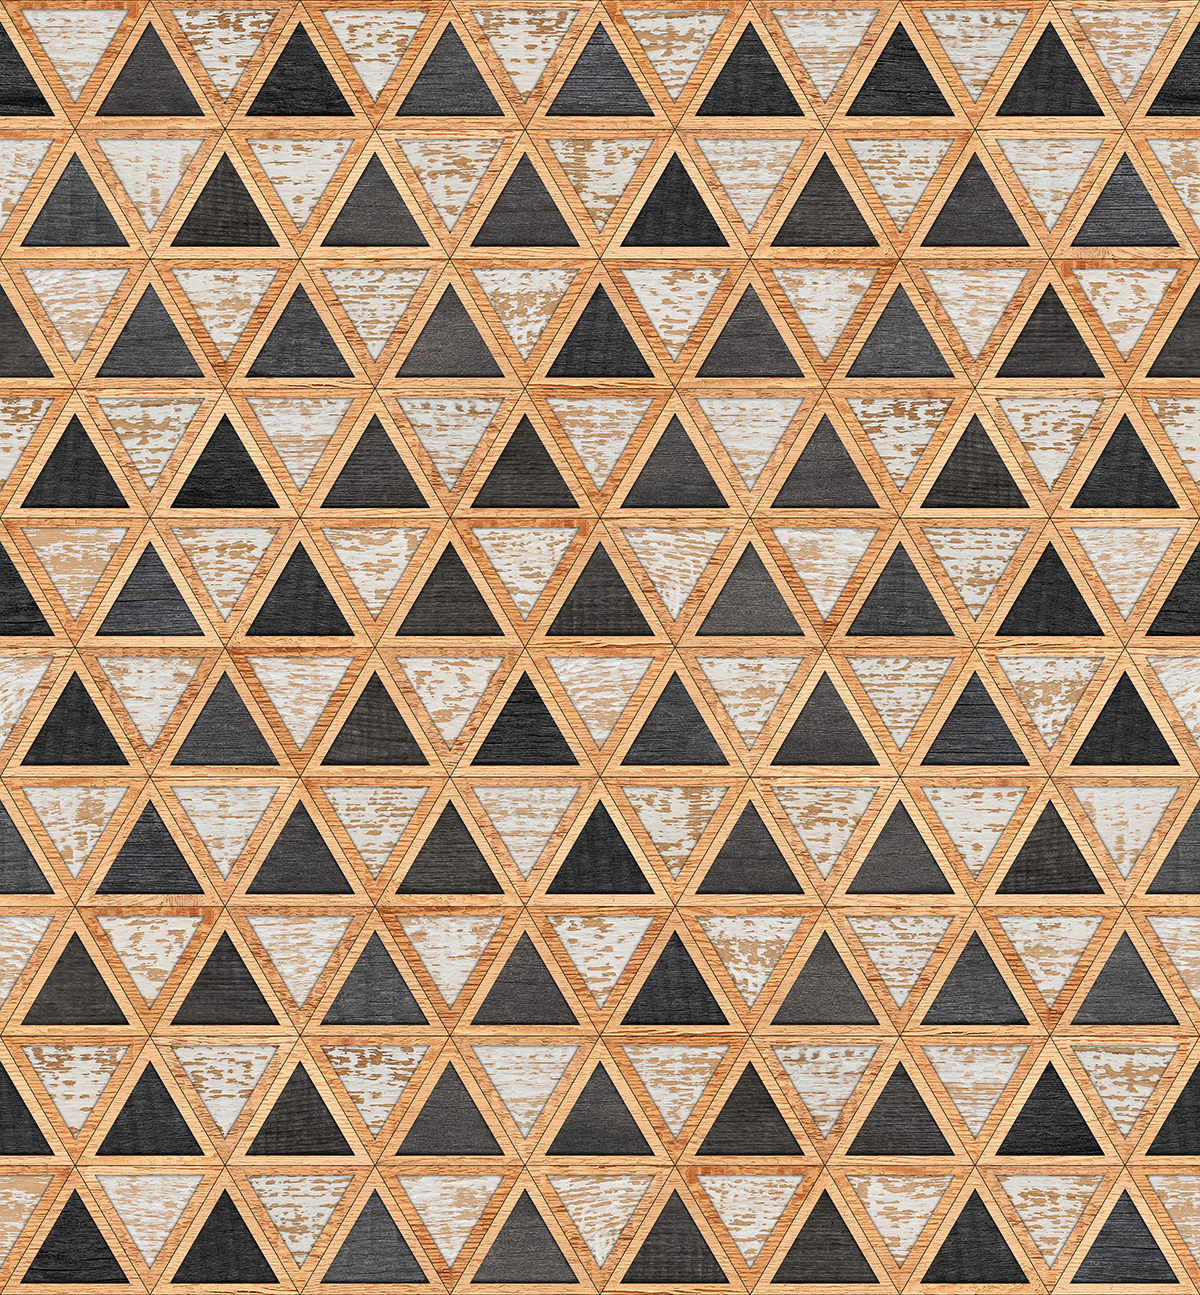 A pattern of triangles on a surface